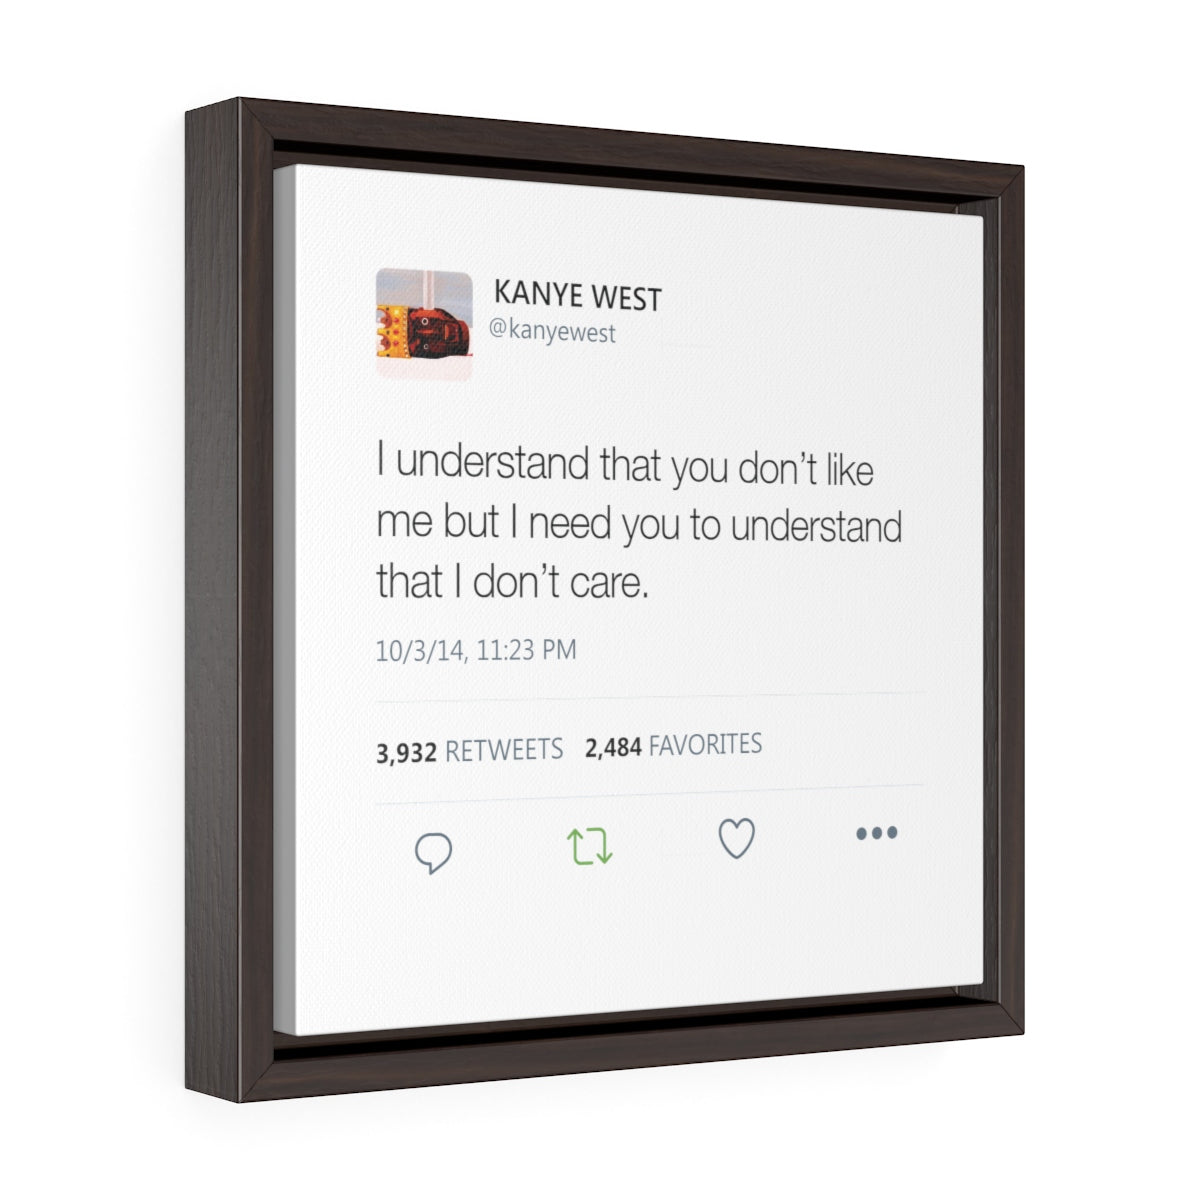 I understand that you don't like me but I need you to understand that I don't care. Kanye West Tweet Quote Square Framed Gallery Wrap Canvas-12″ × 12″-Archethype